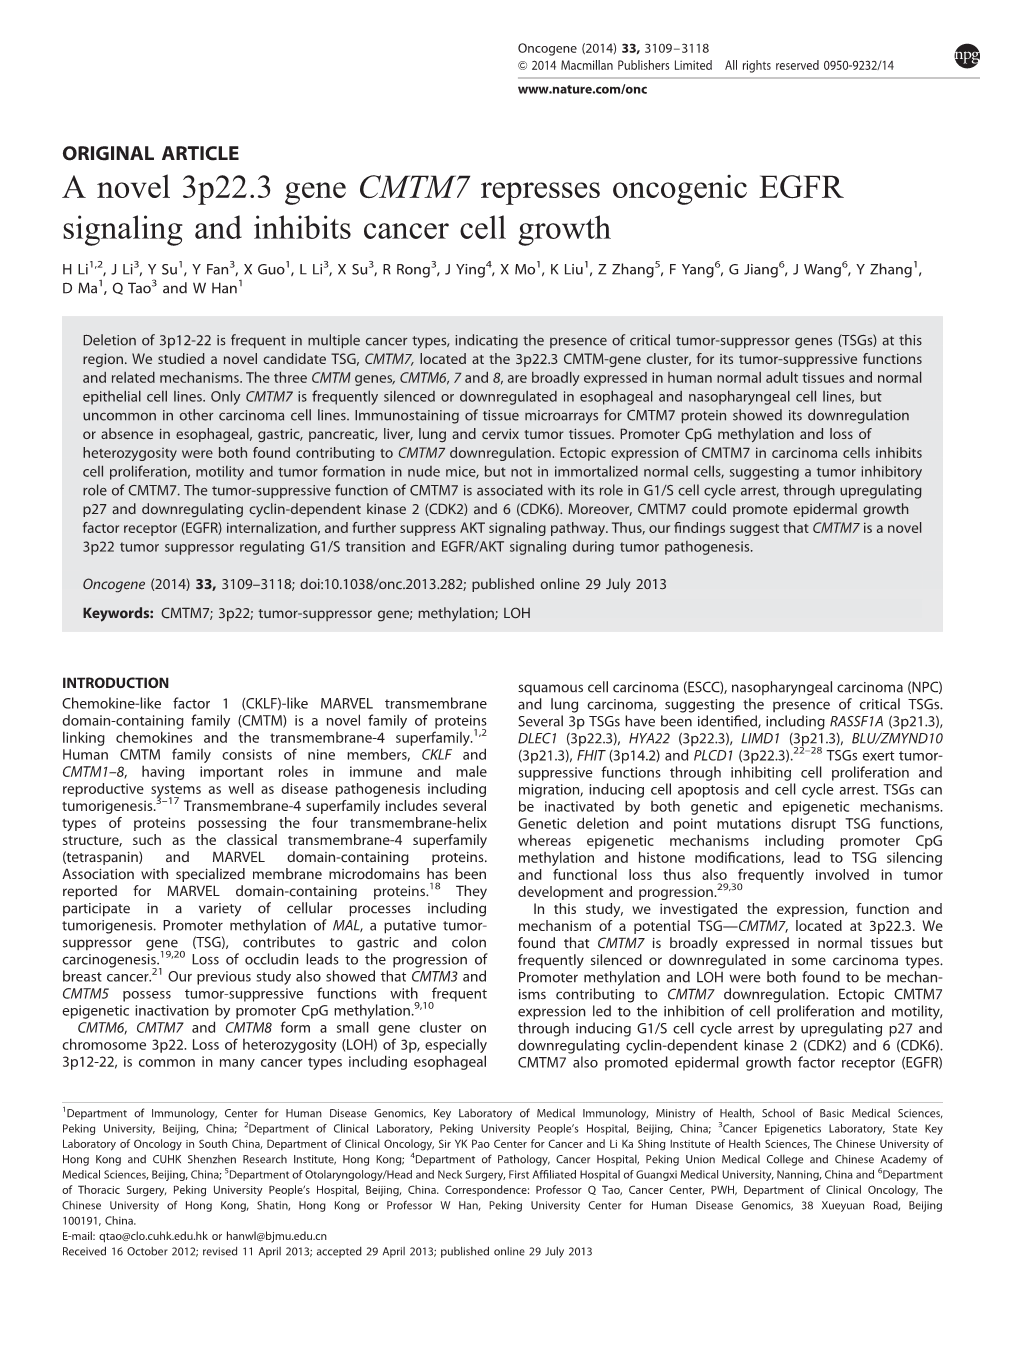 A Novel 3P22.3 Gene CMTM7 Represses Oncogenic EGFR Signaling and Inhibits Cancer Cell Growth